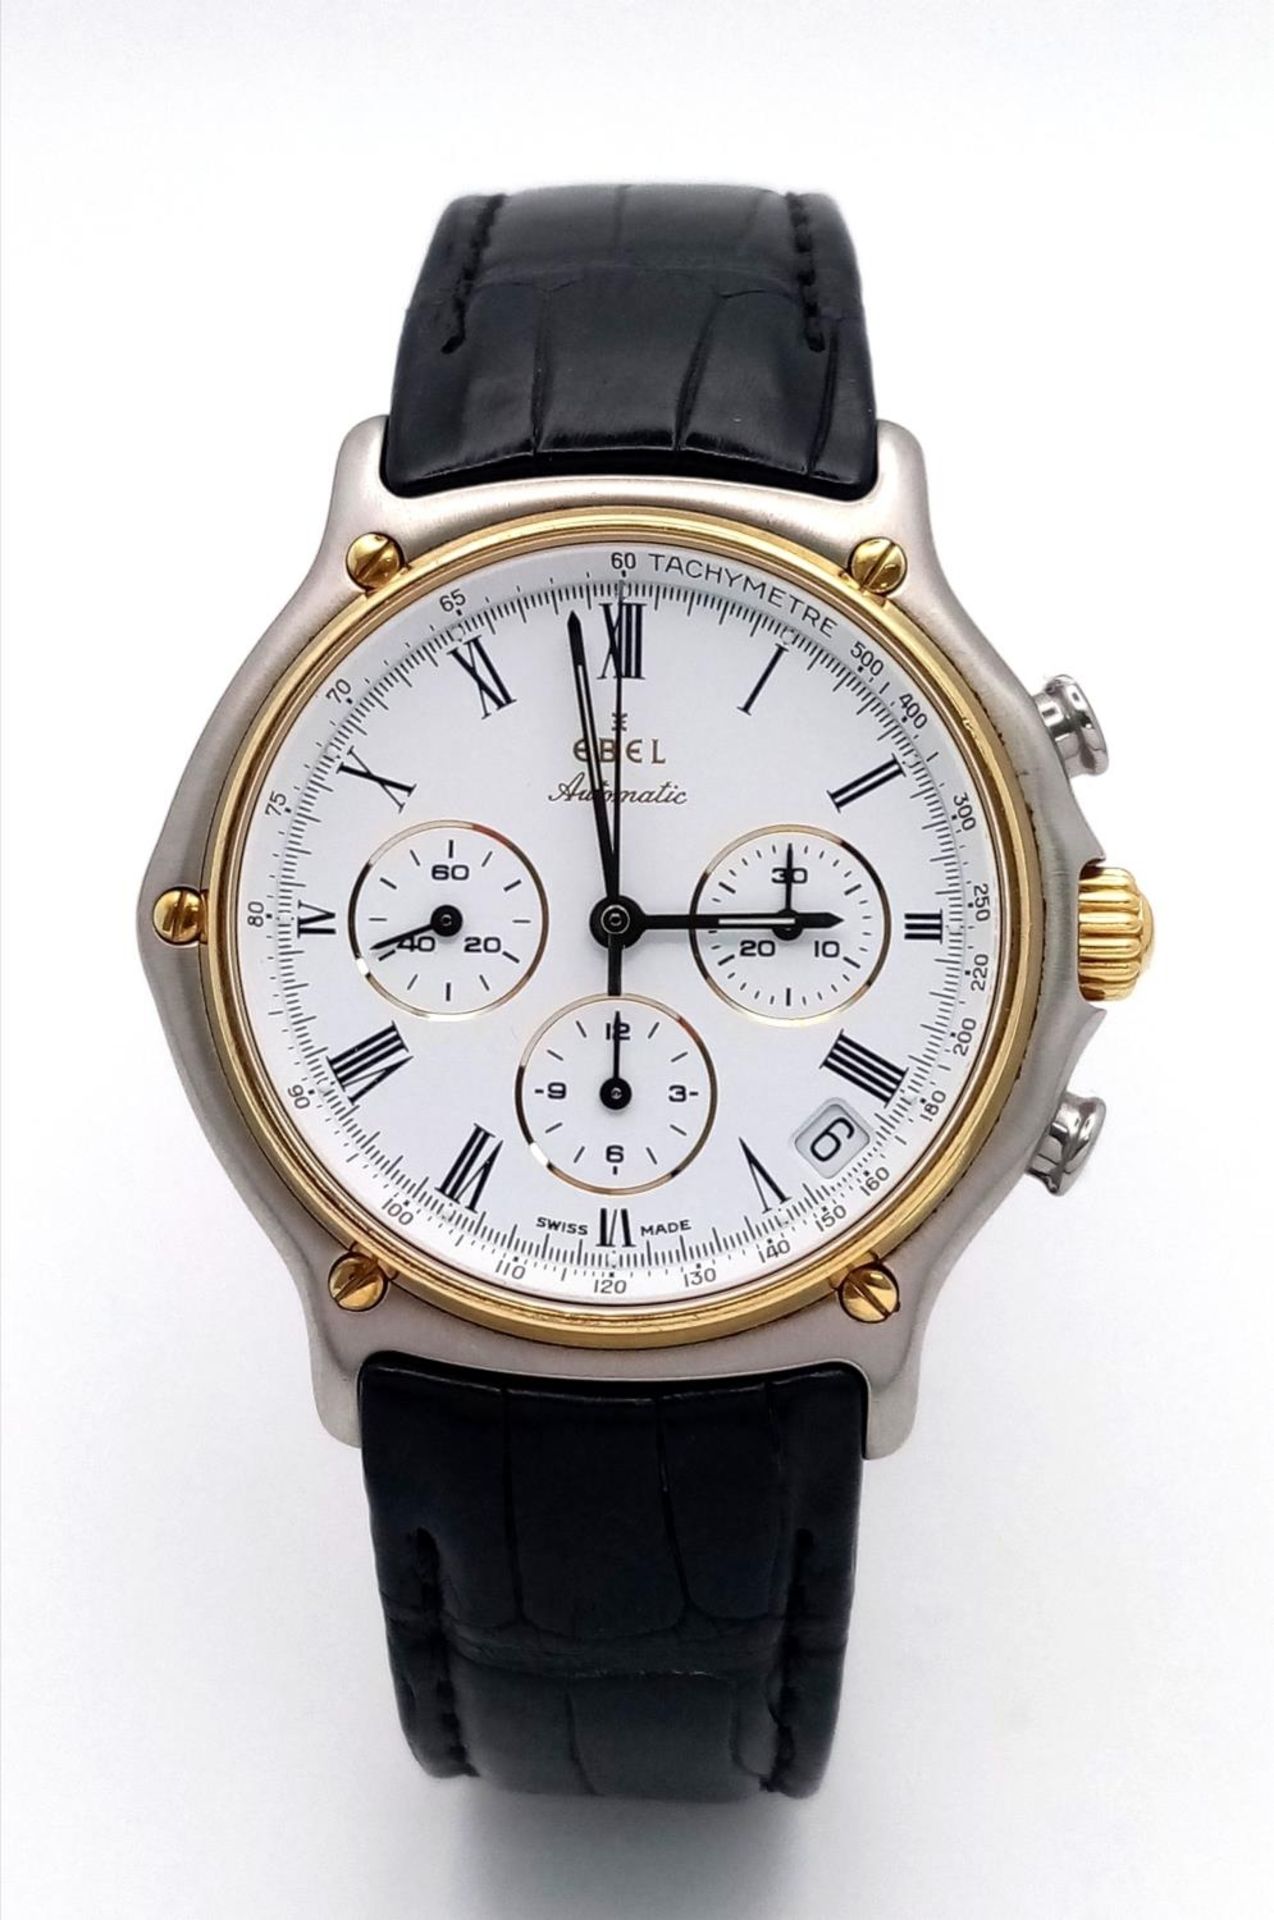 An Ebel Automatic Chronograph Gents Watch. Black leather strap. Two tone case - 38mm. White dial - Bild 3 aus 8